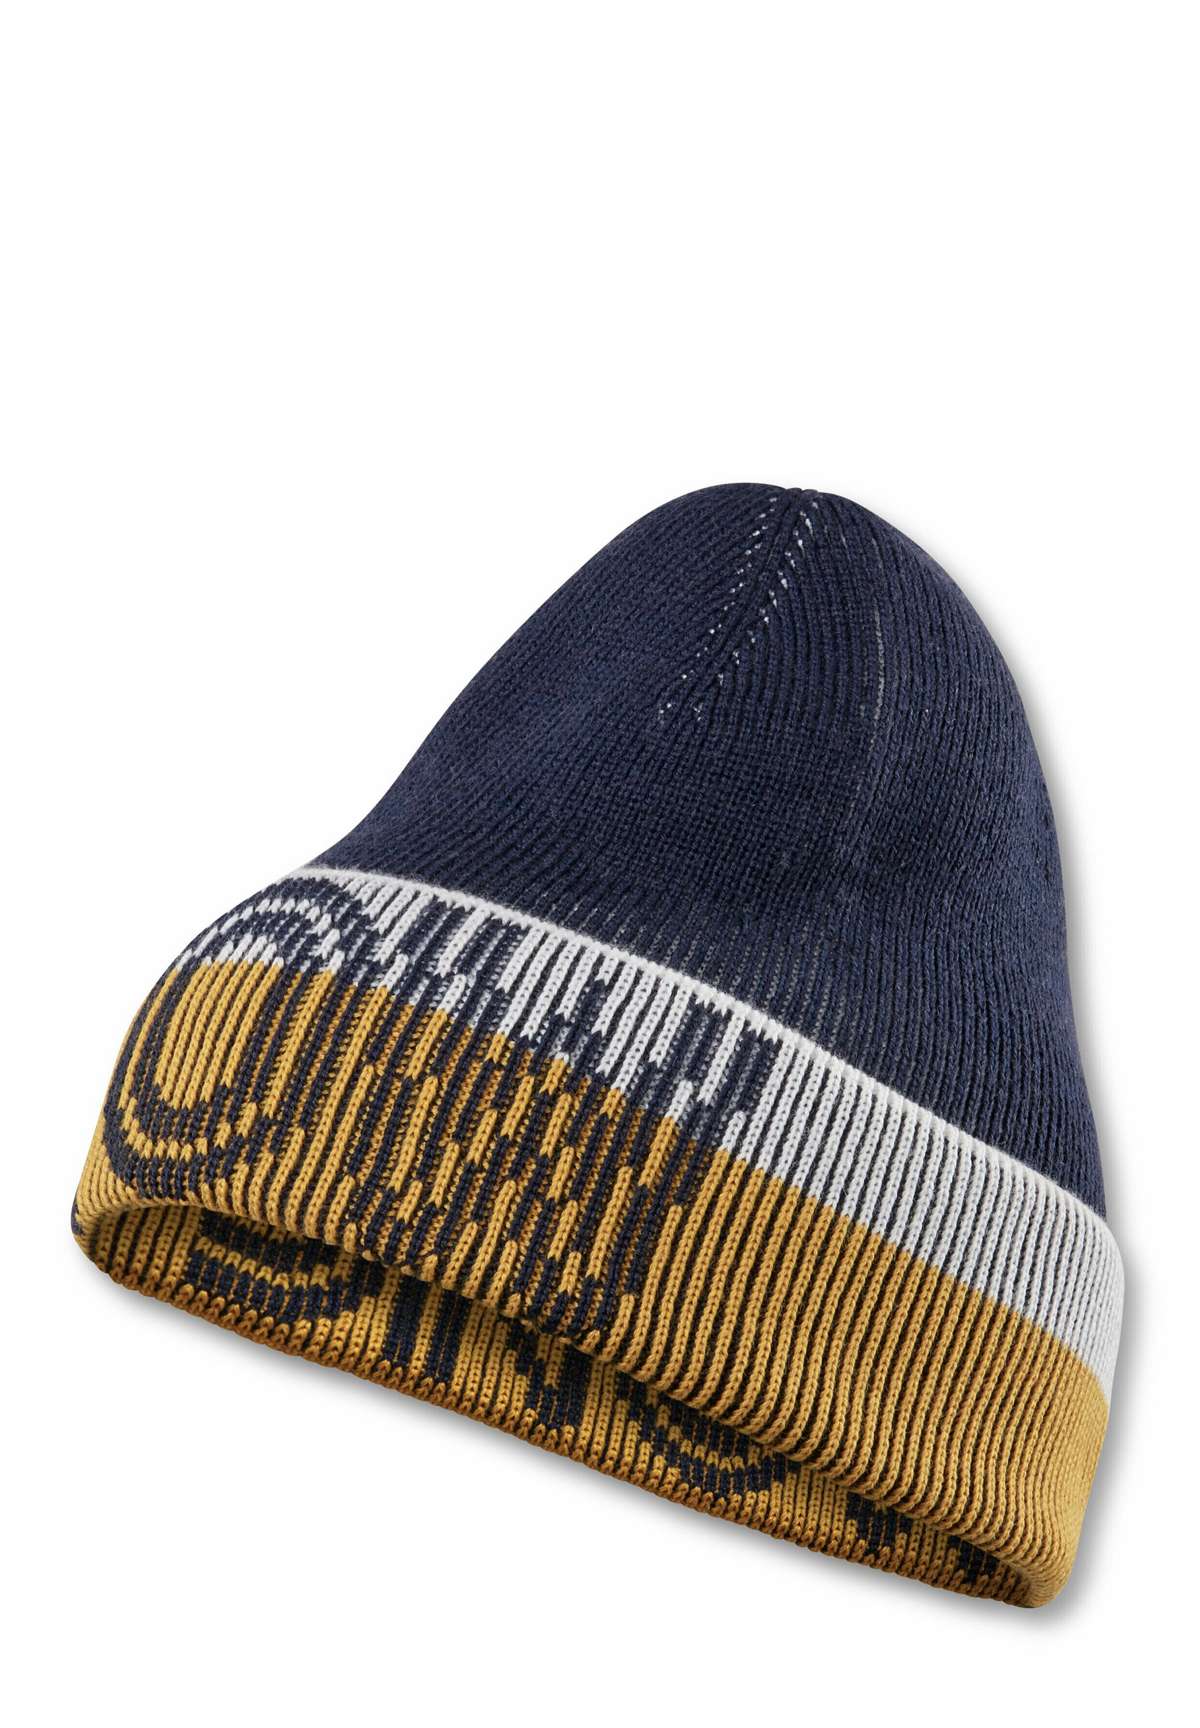 Шапка Ski Beanie For cold to very cold conditions